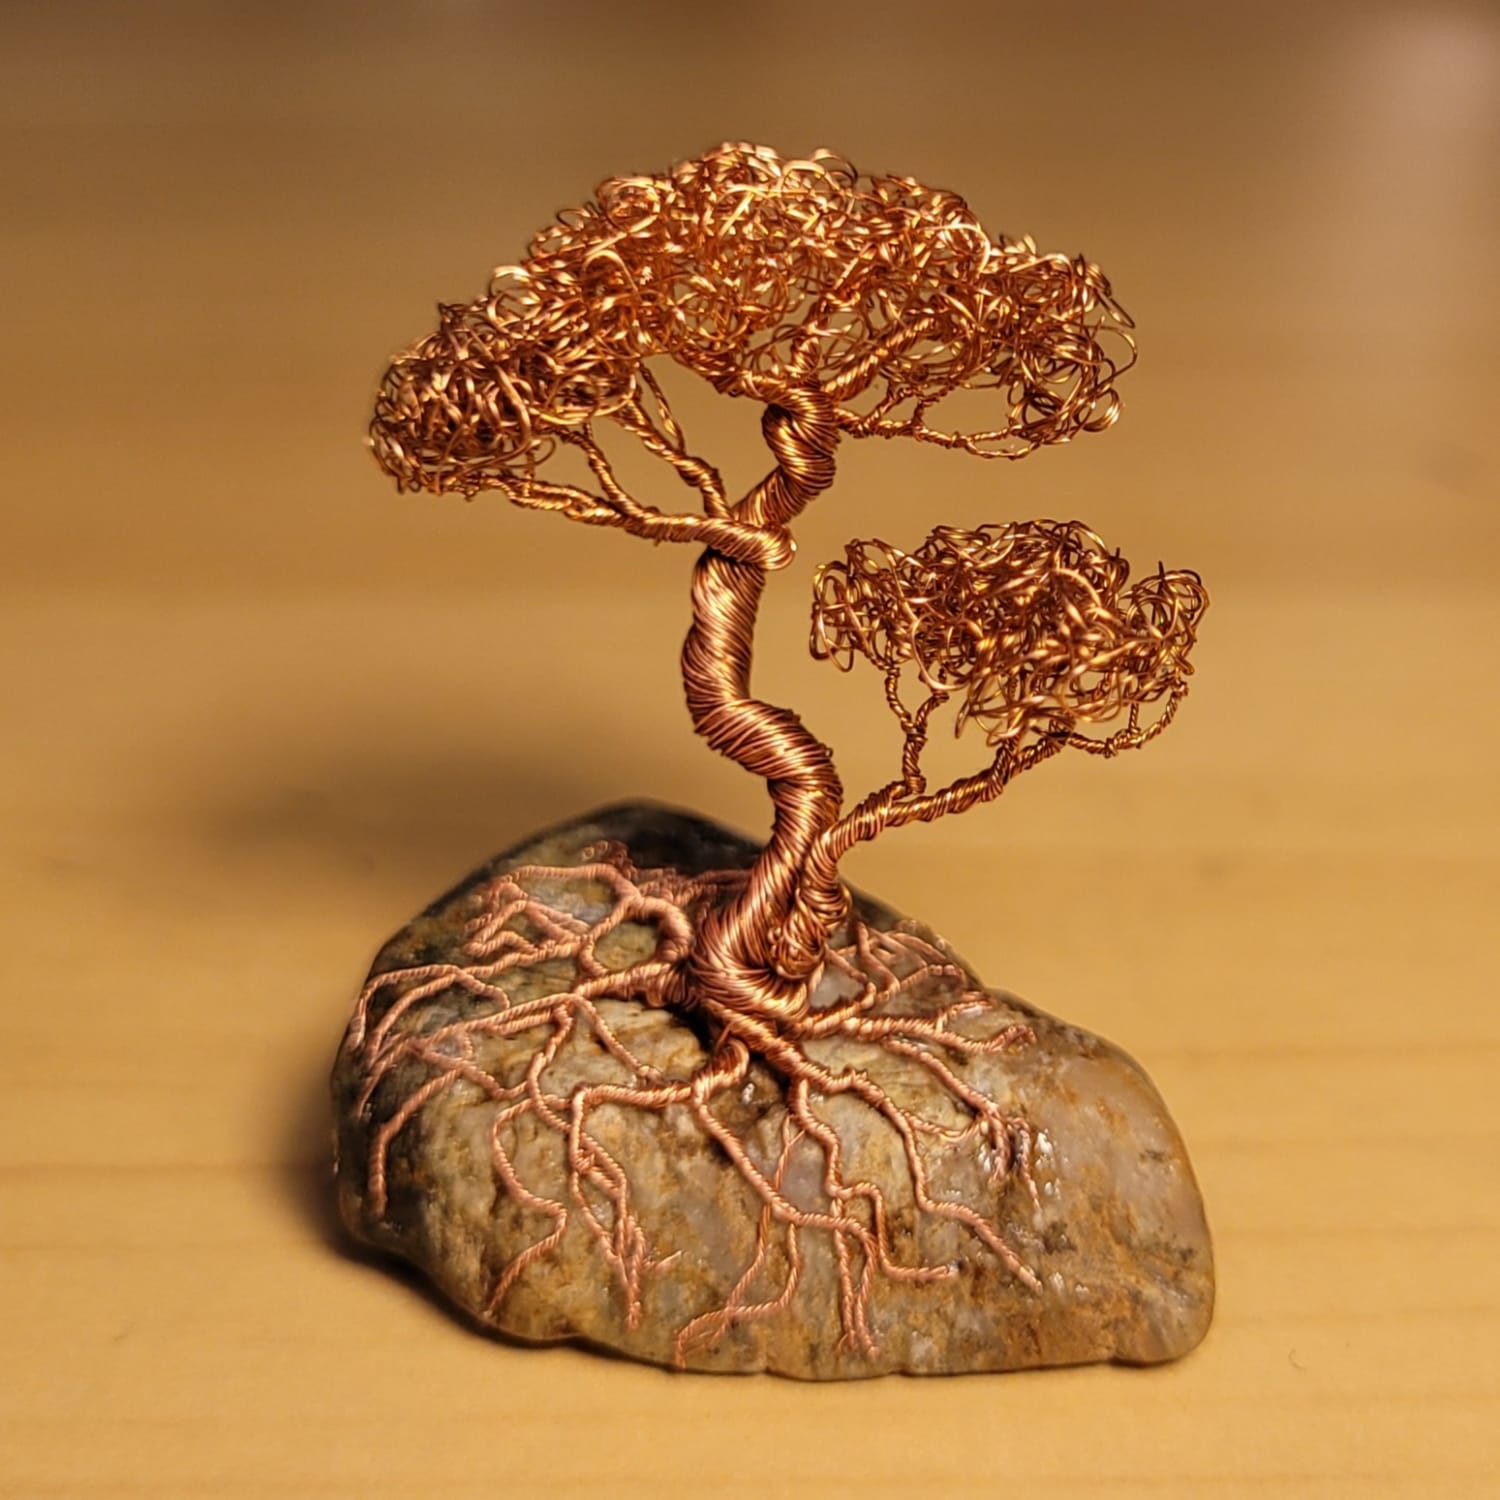 I made this tiny bonsai tree out of copper wire from an old USB cable